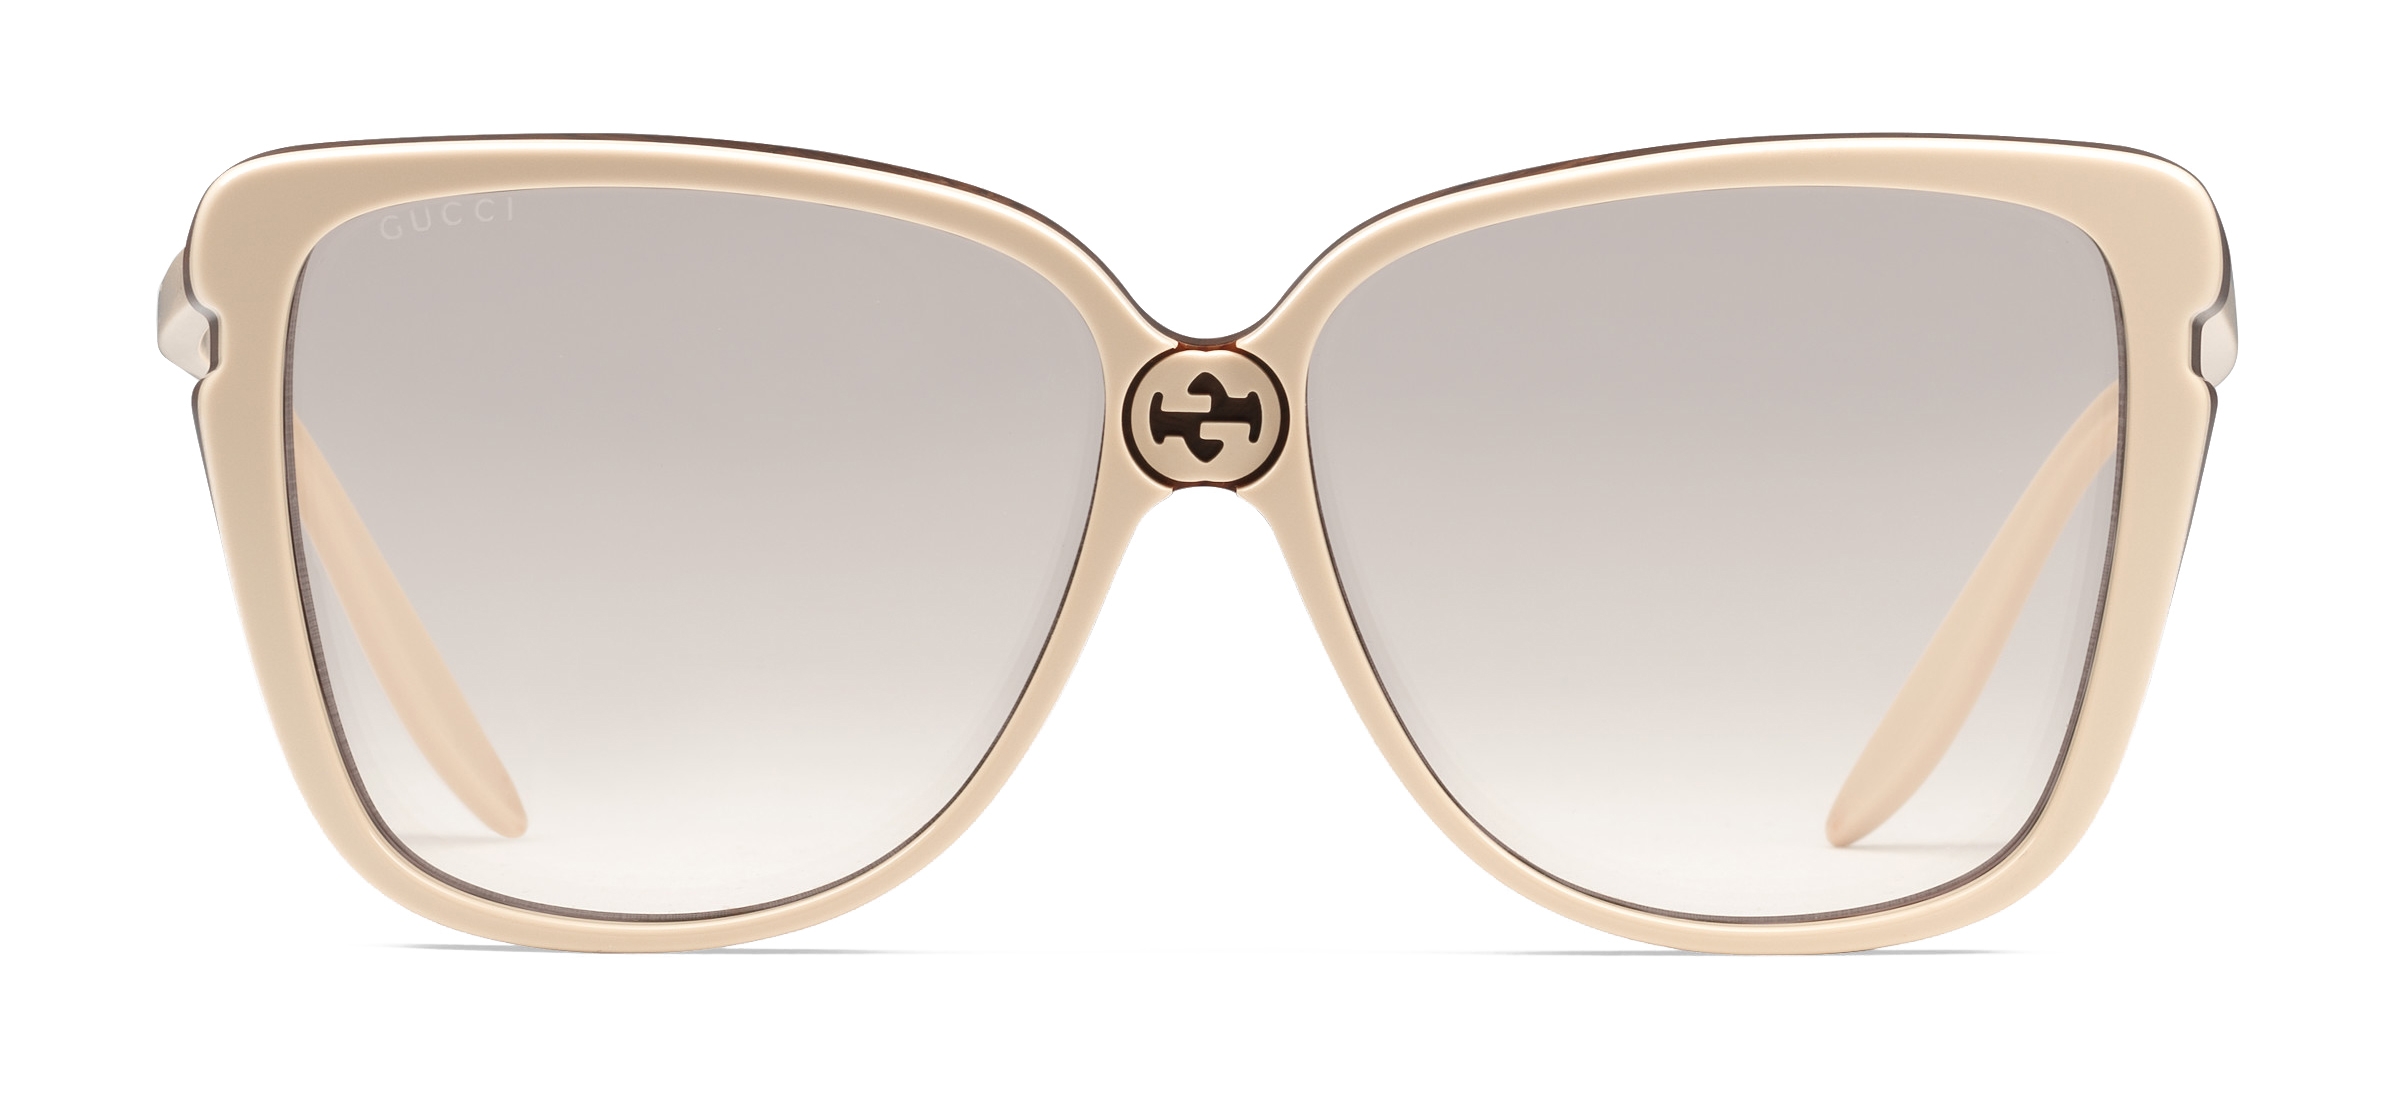 butterfly gucci sunglasses